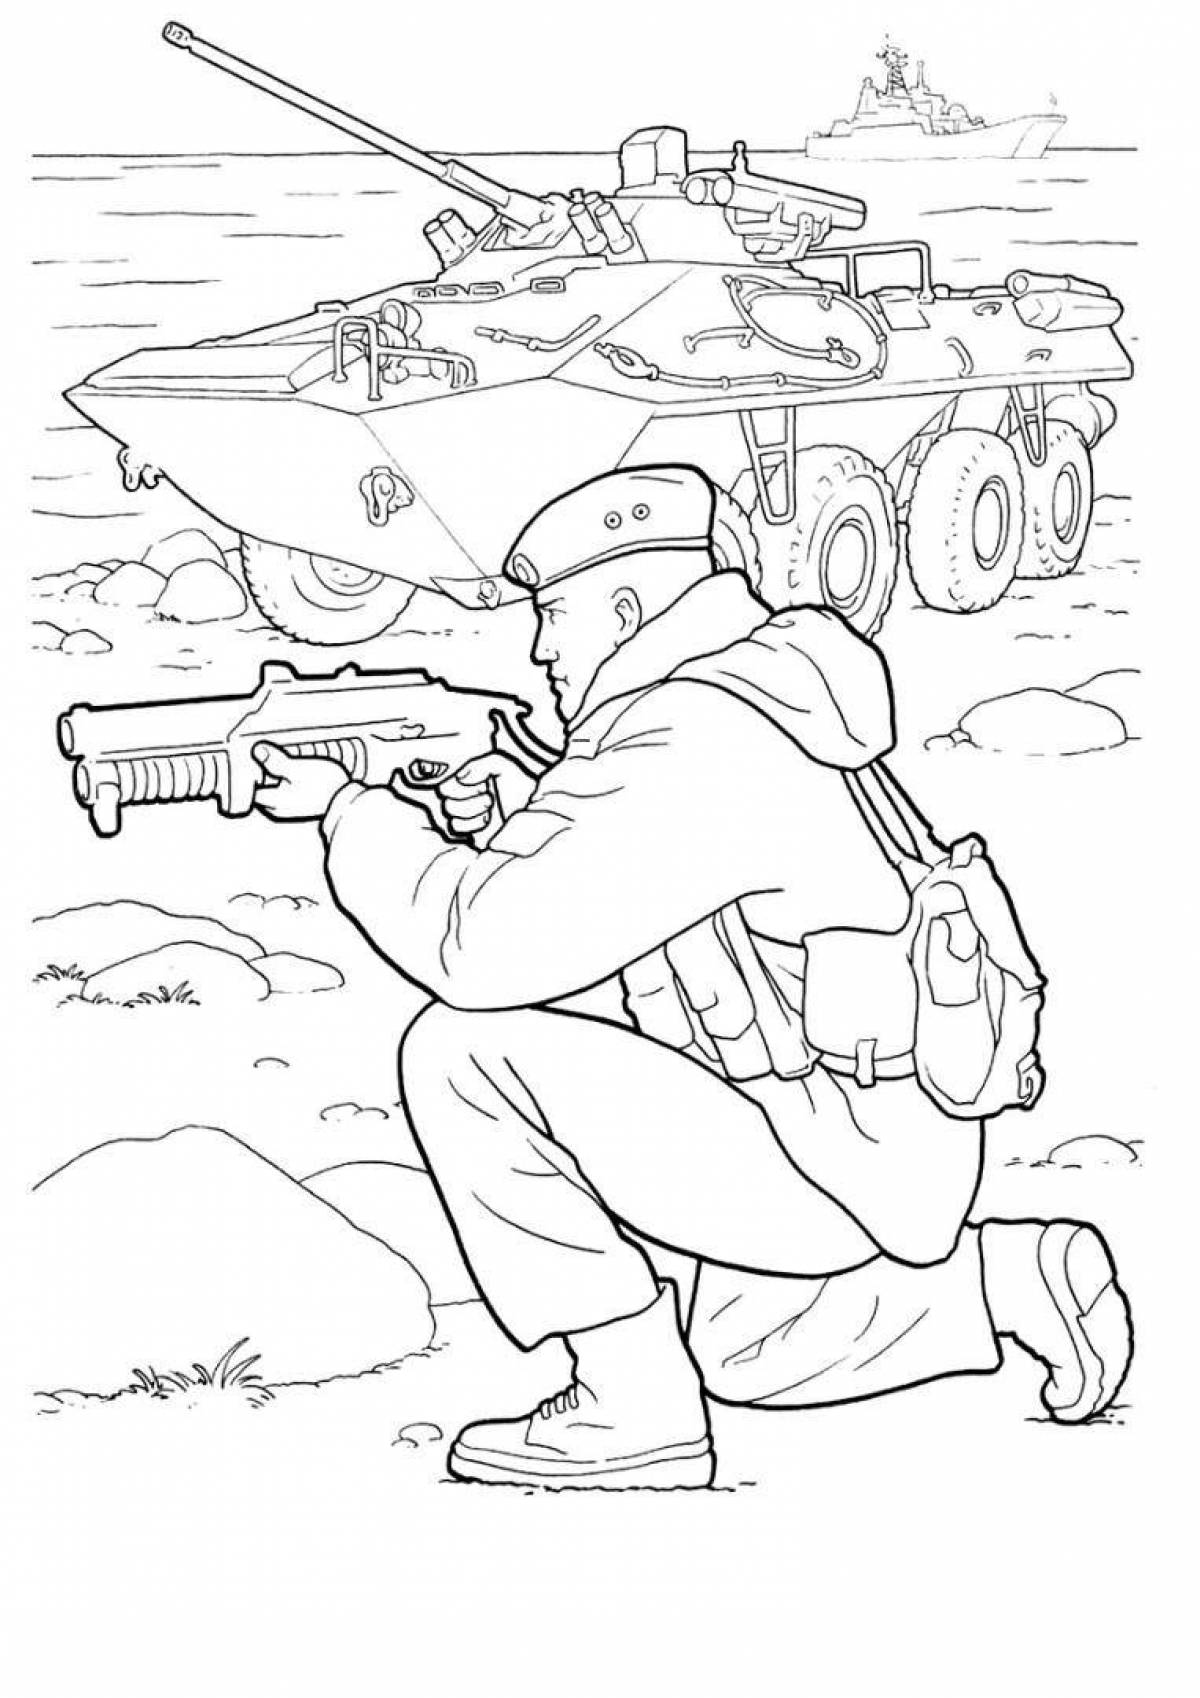 Coloring page grand defender of the fatherland